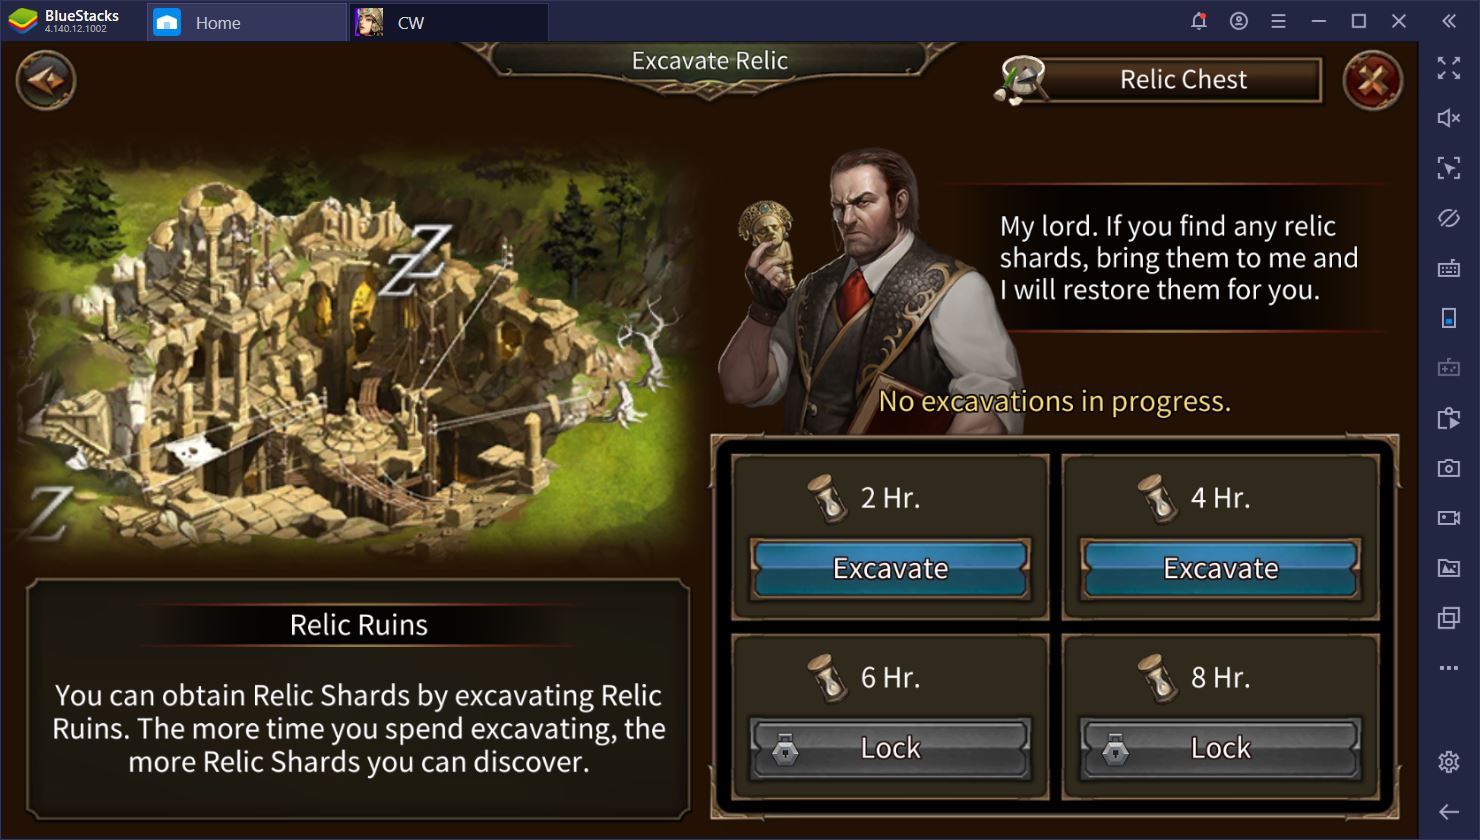 Reign of Empires – Epic Battle Tactics RTS Game on PC: The Complete Guide to Buildings